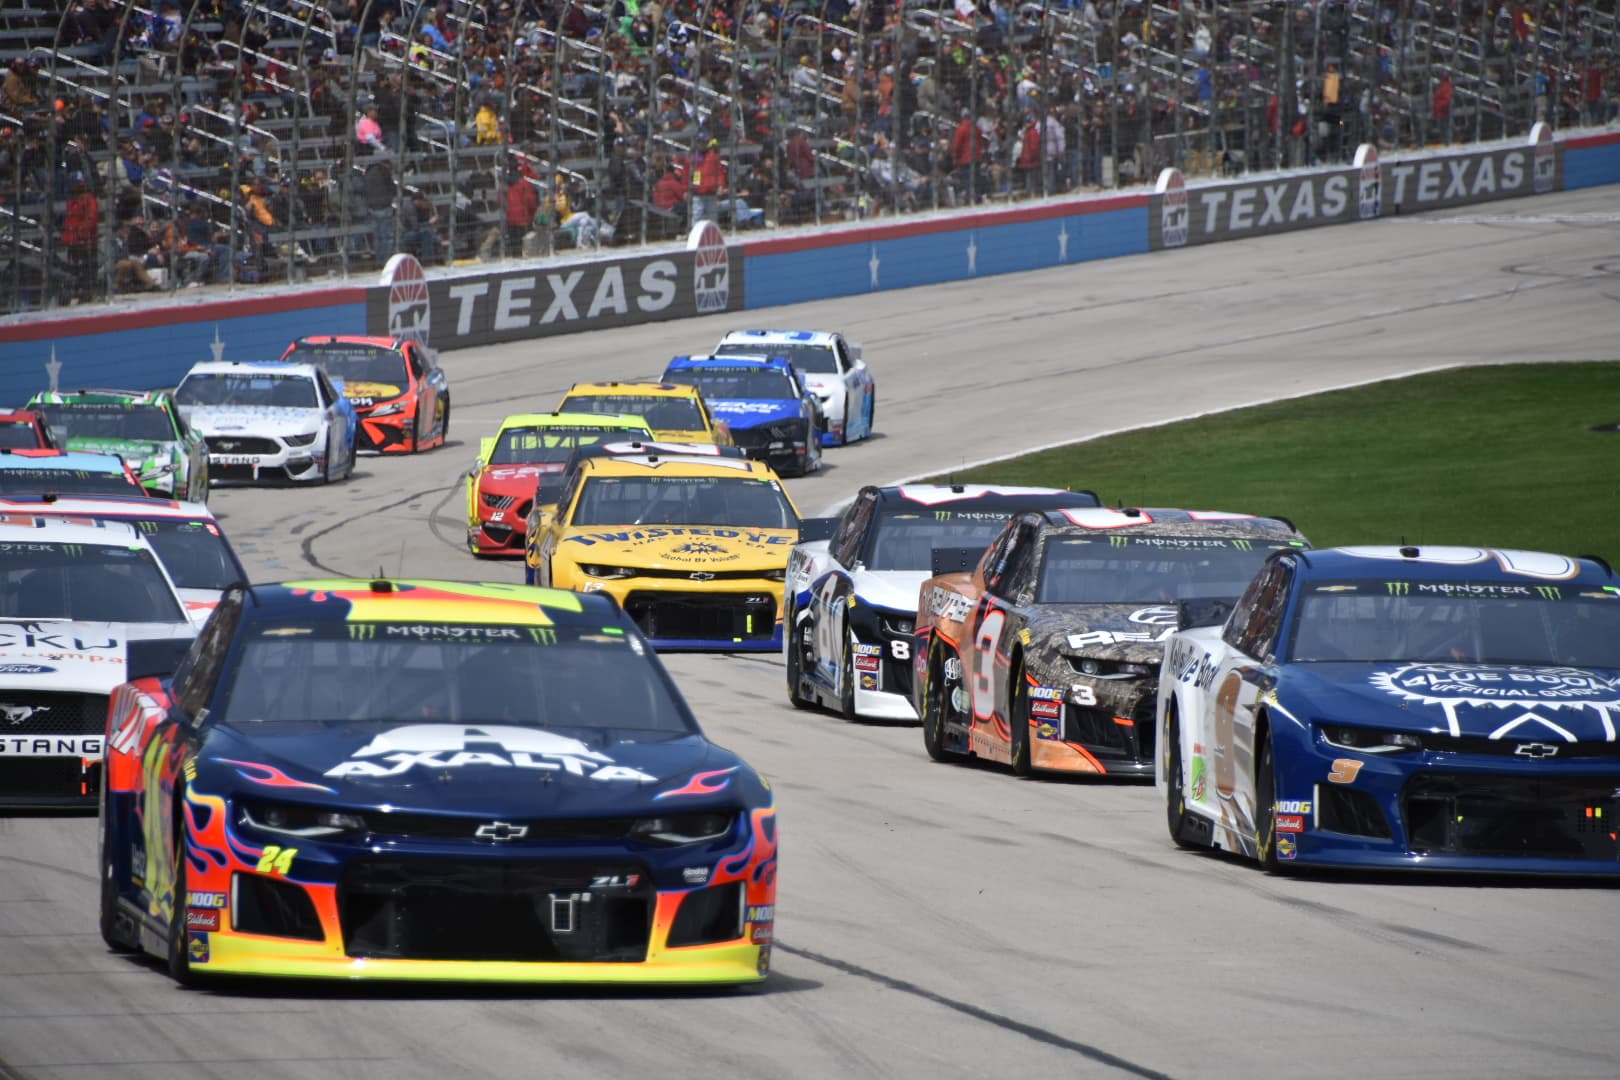 Was last Sunday's race at Texas truly indicative for this year's package in future races? (Photo Credit: Sean Folsom/TPF)